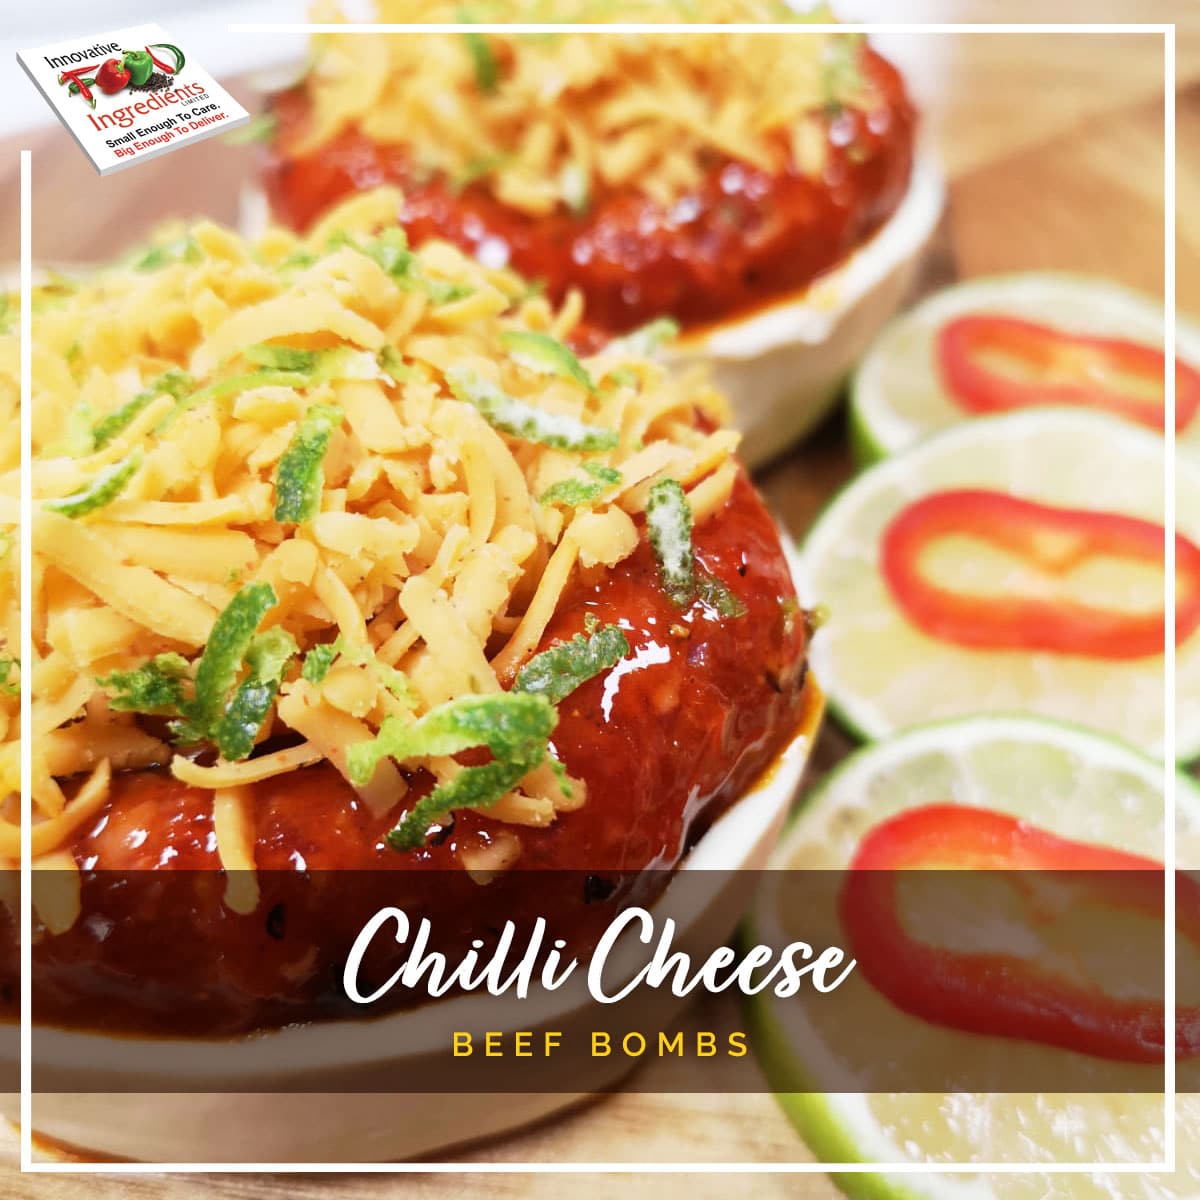 Chilli Cheese Beef Bombs